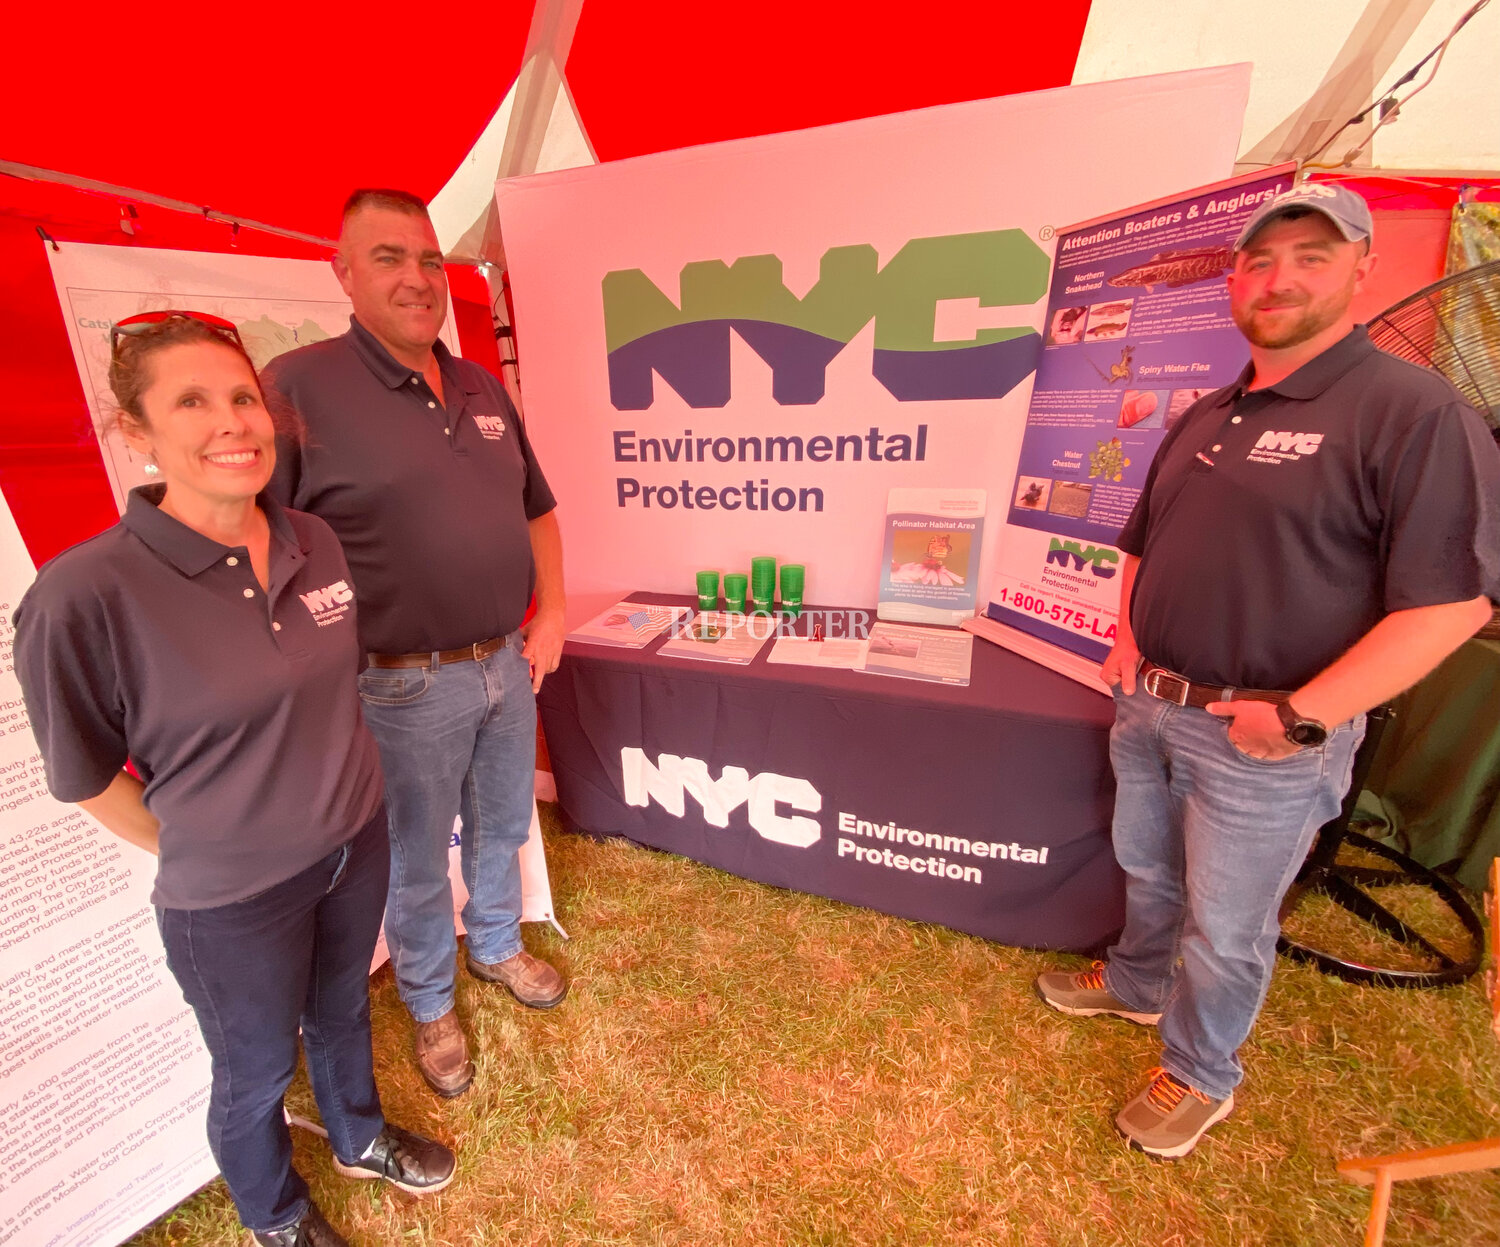 New York City Department of Environmental Protection staffers are at the Delaware County Fair assisting people with access permits to city-owned land and reservoirs for recreation. Pictured are Josh McGraw, Thomas Lamport and Sara Storrer.